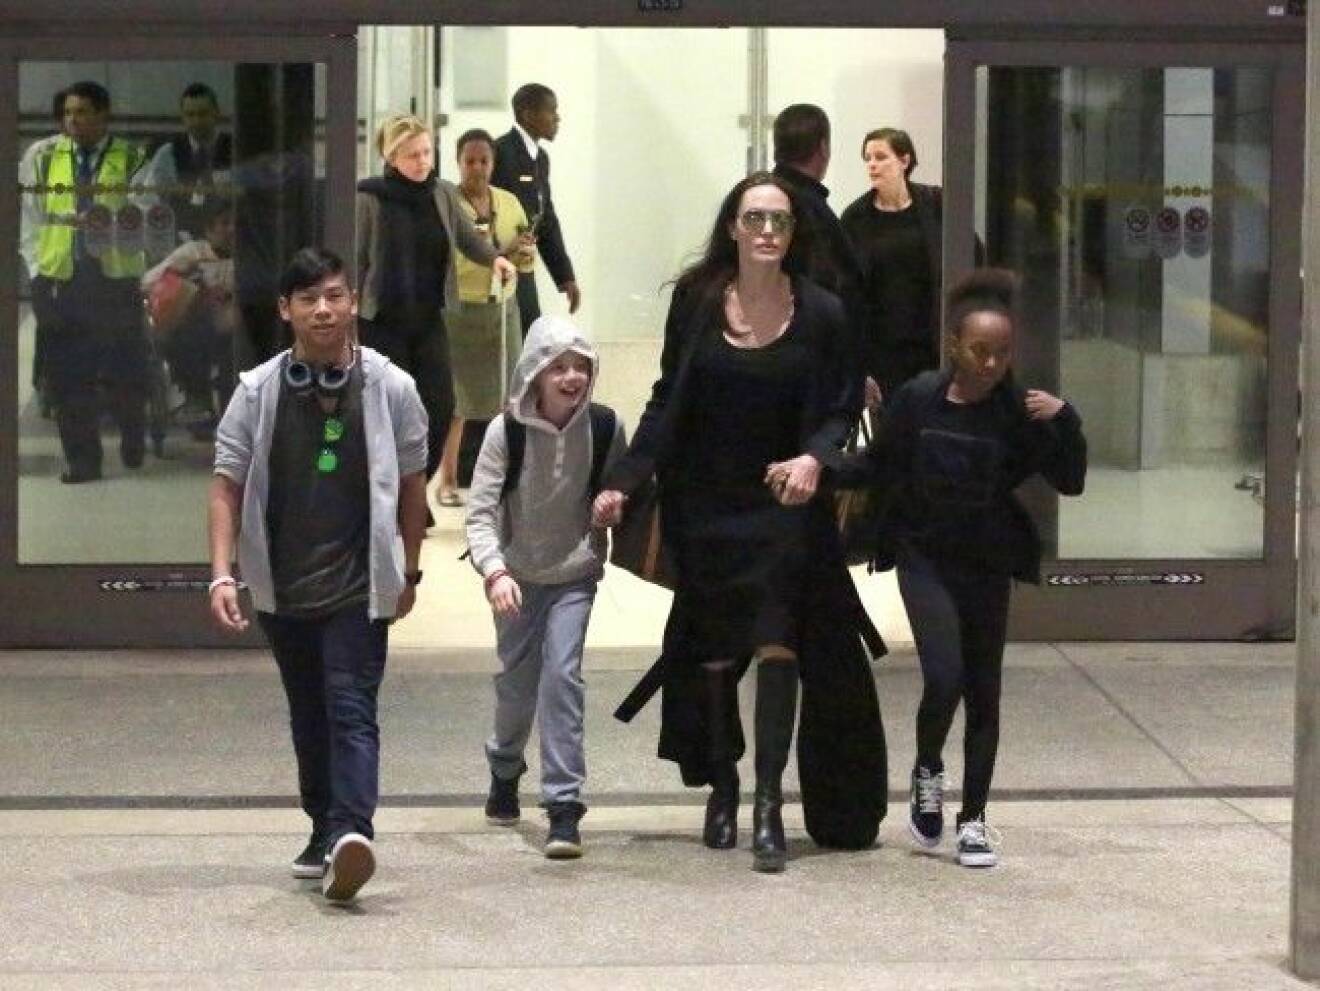 Angelina Jolie and her children arrive in Los Angeles. Jolie was seen with her kids, Shiloh, Maddox & Zahara. Jolie was seen in the center holding hands with Zahara & Shiloh as Maddox independently walked ahead. Pictured: Angelina Jolie, Shiloh Jolie-Pitt, Maddox Jolie-Pitt, Zahara Jolie-Pitt Ref: SPL1239691 020316 Picture by: Sharky / Splash News Splash News and Pictures Los Angeles:310-821-2666 New York: 212-619-2666 London: 870-934-2666 photodesk@splashnews.com *** Local Caption *** 8.18251239